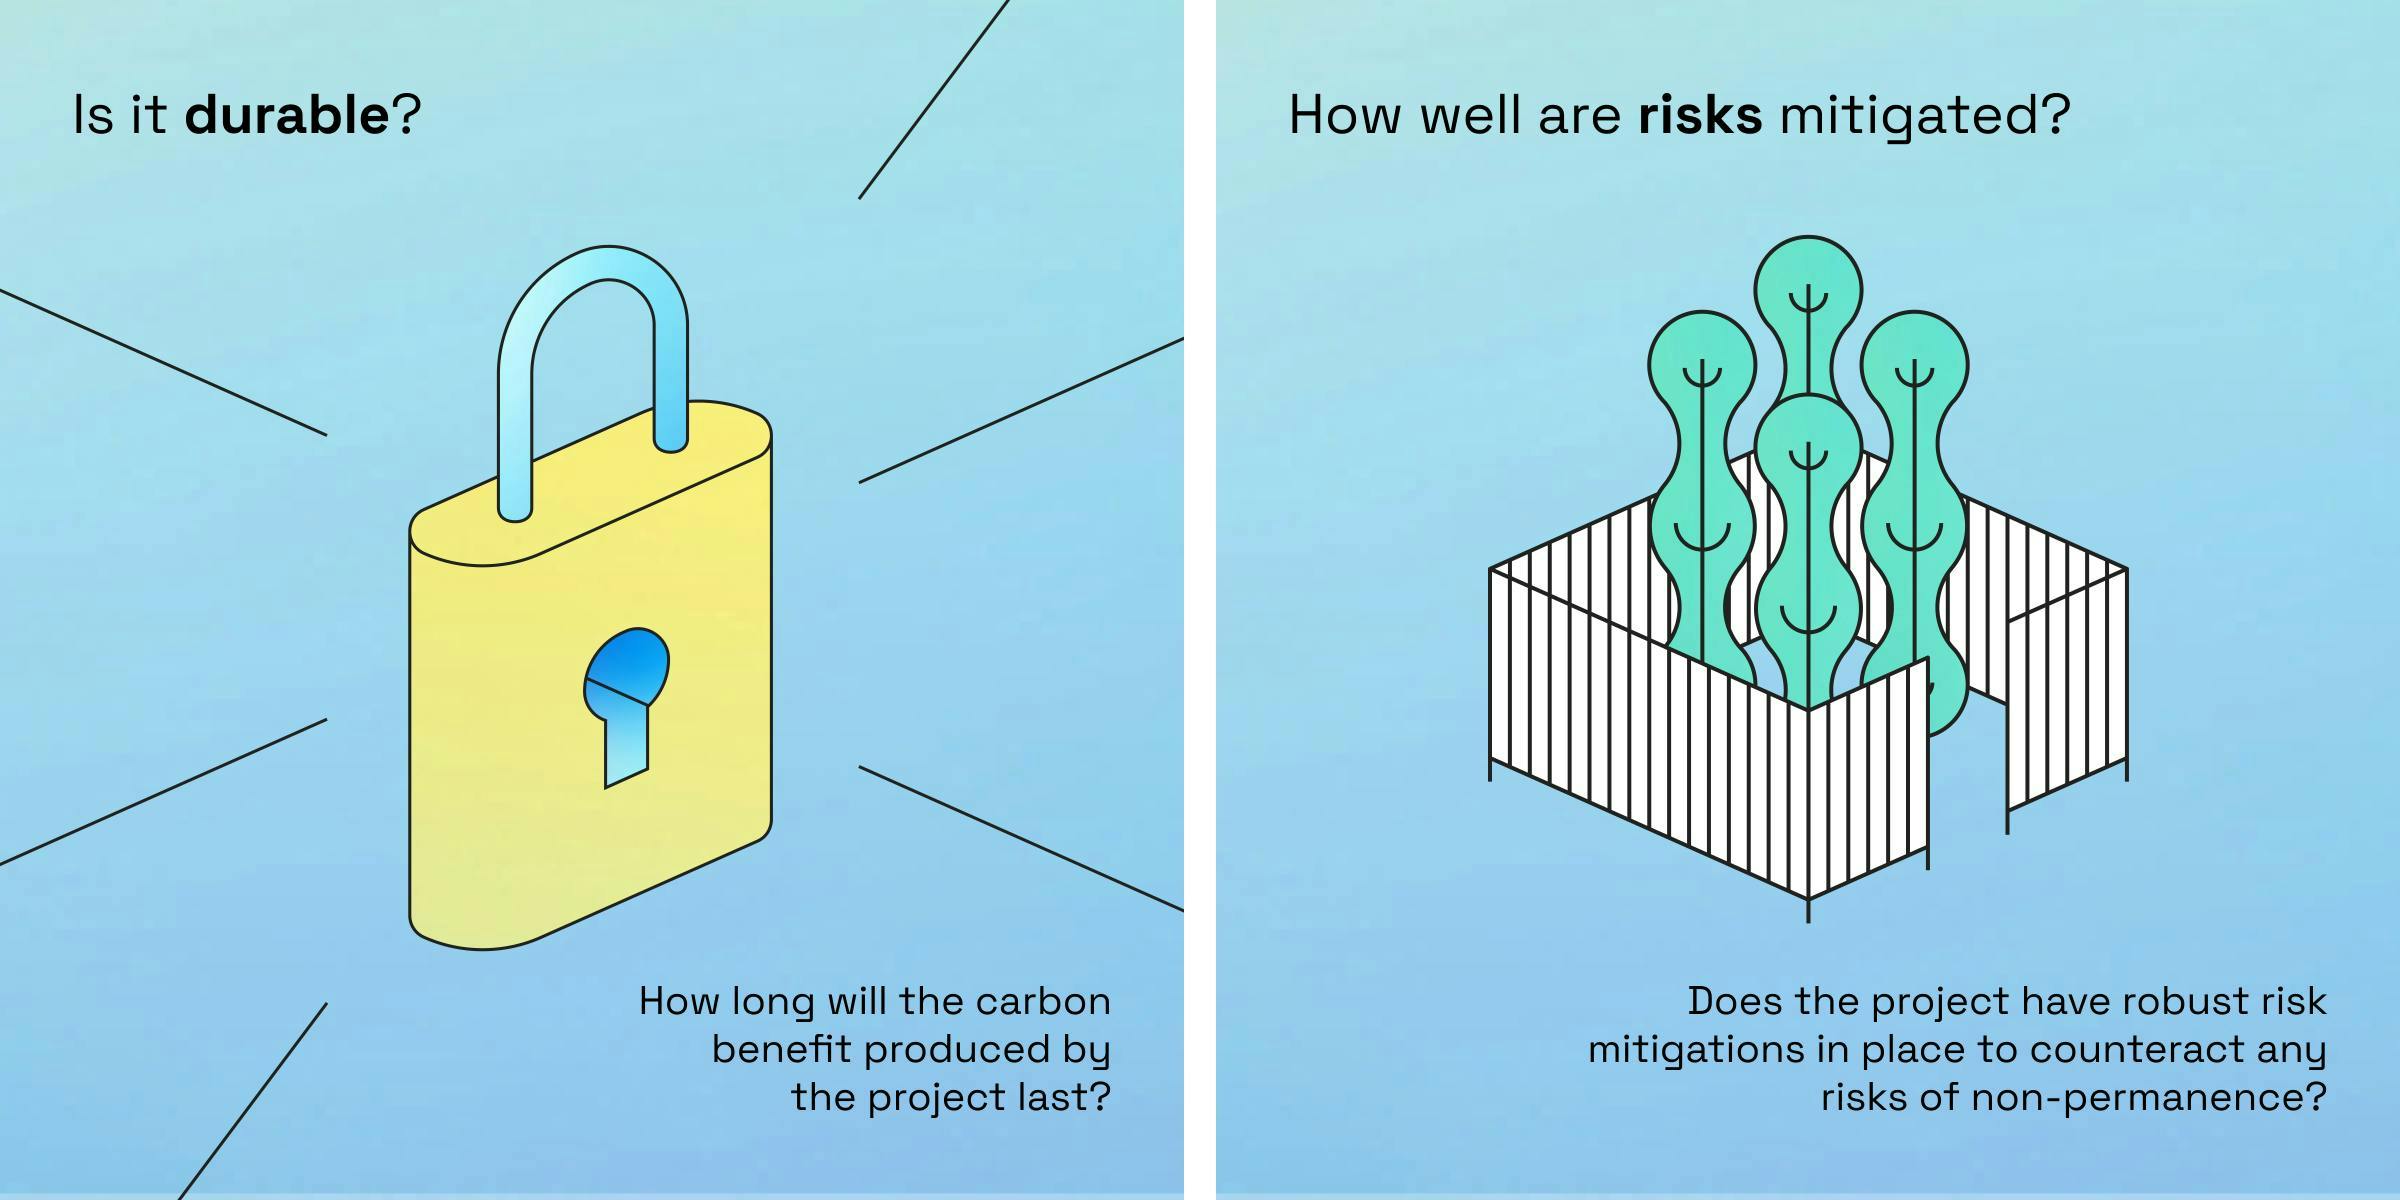 Left-hand image: is it durable? Right-hand image: How well are risks mitigated?